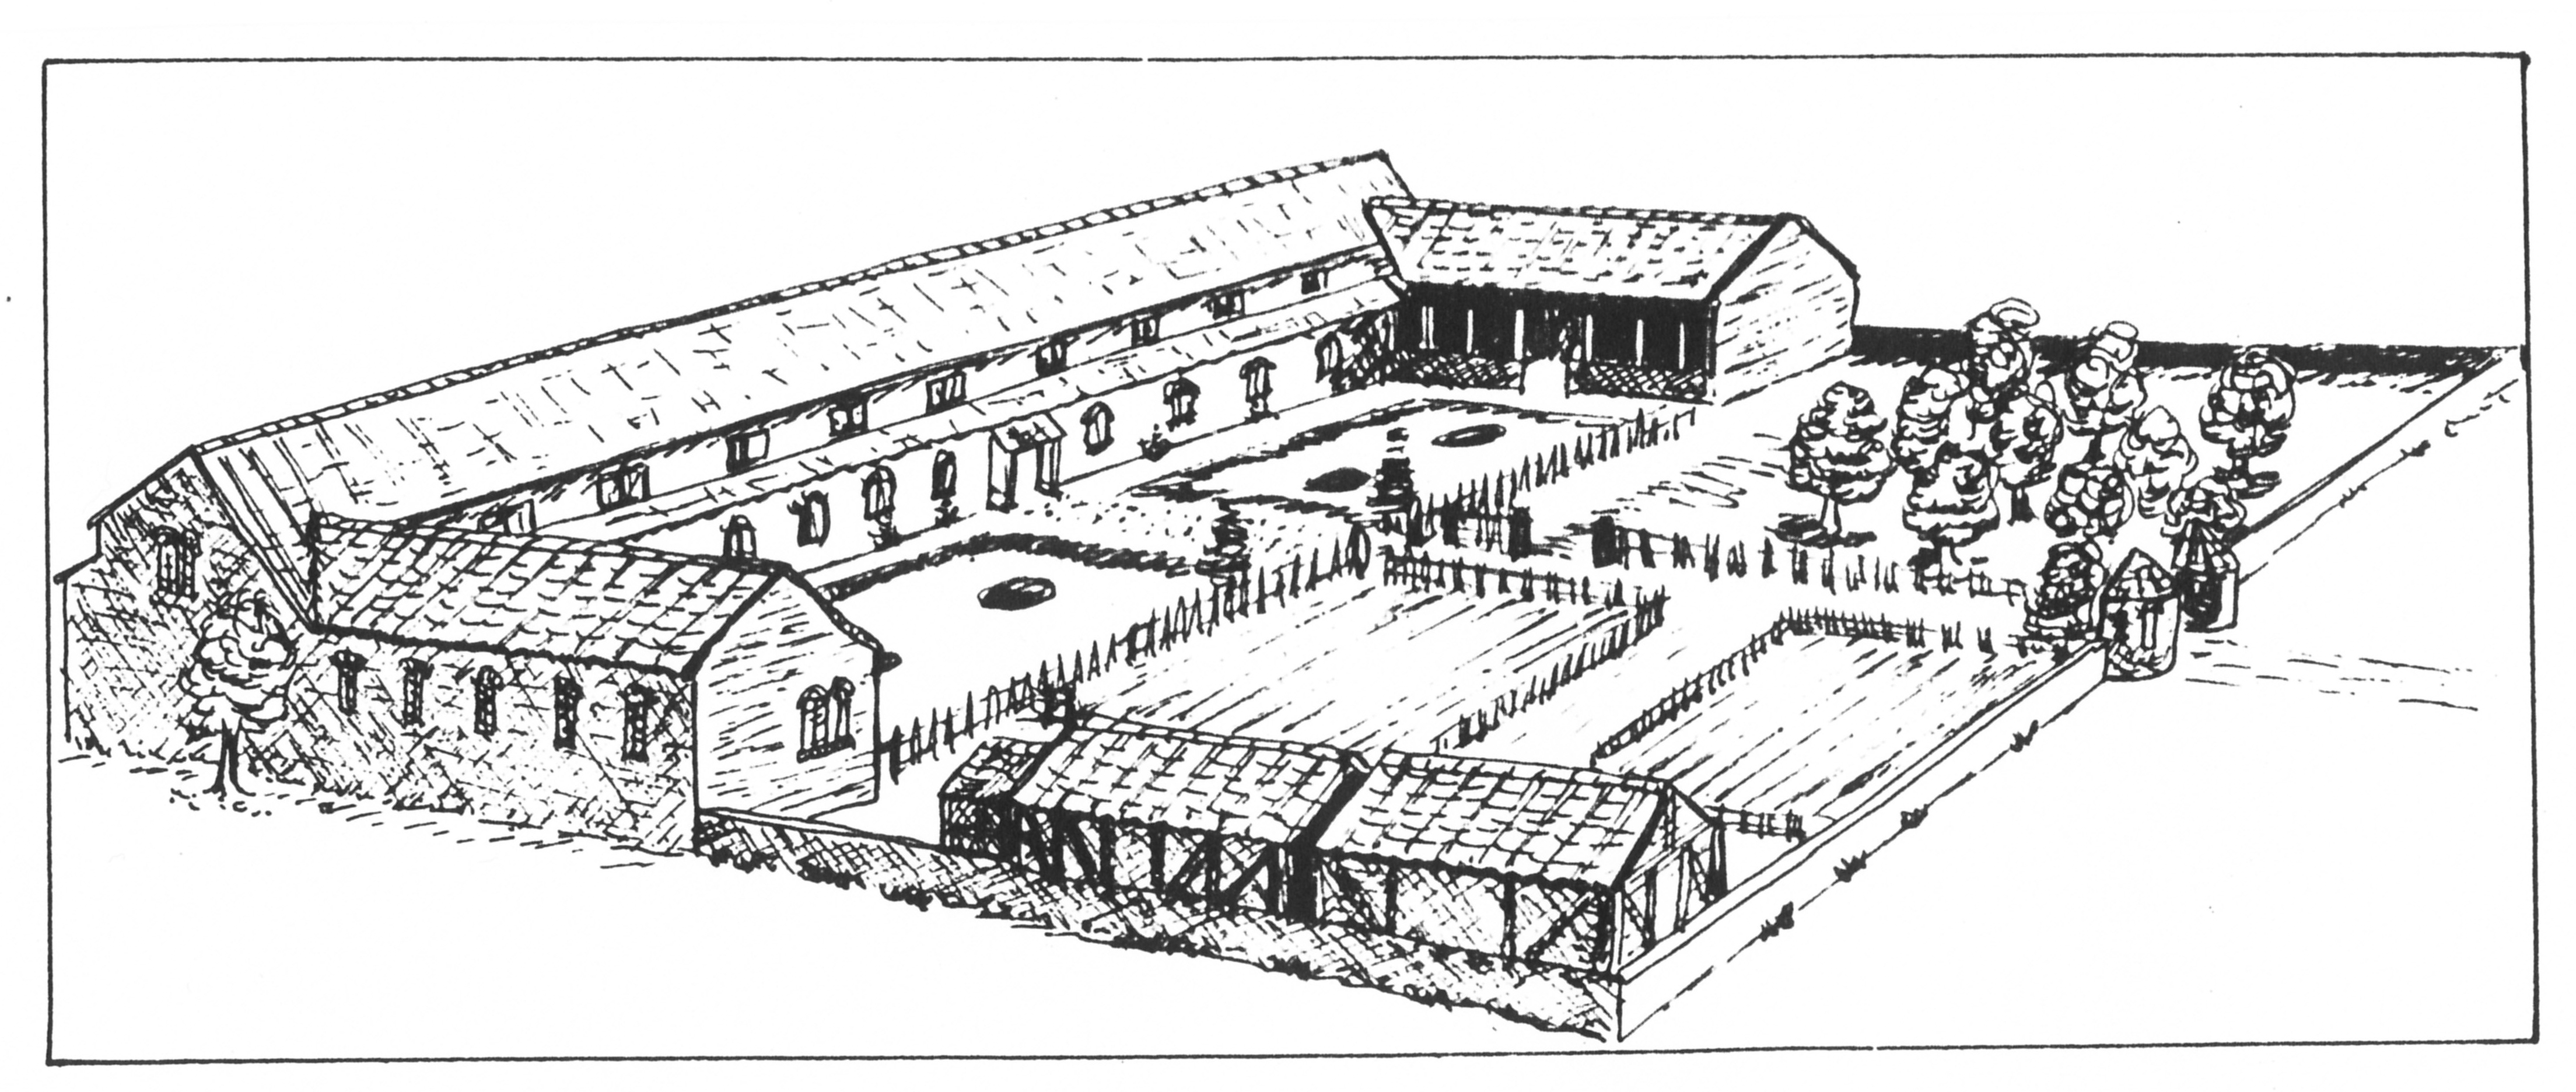 Fig. 2: Reconstruction of the house and garden. Courtesy of K. Branigan.